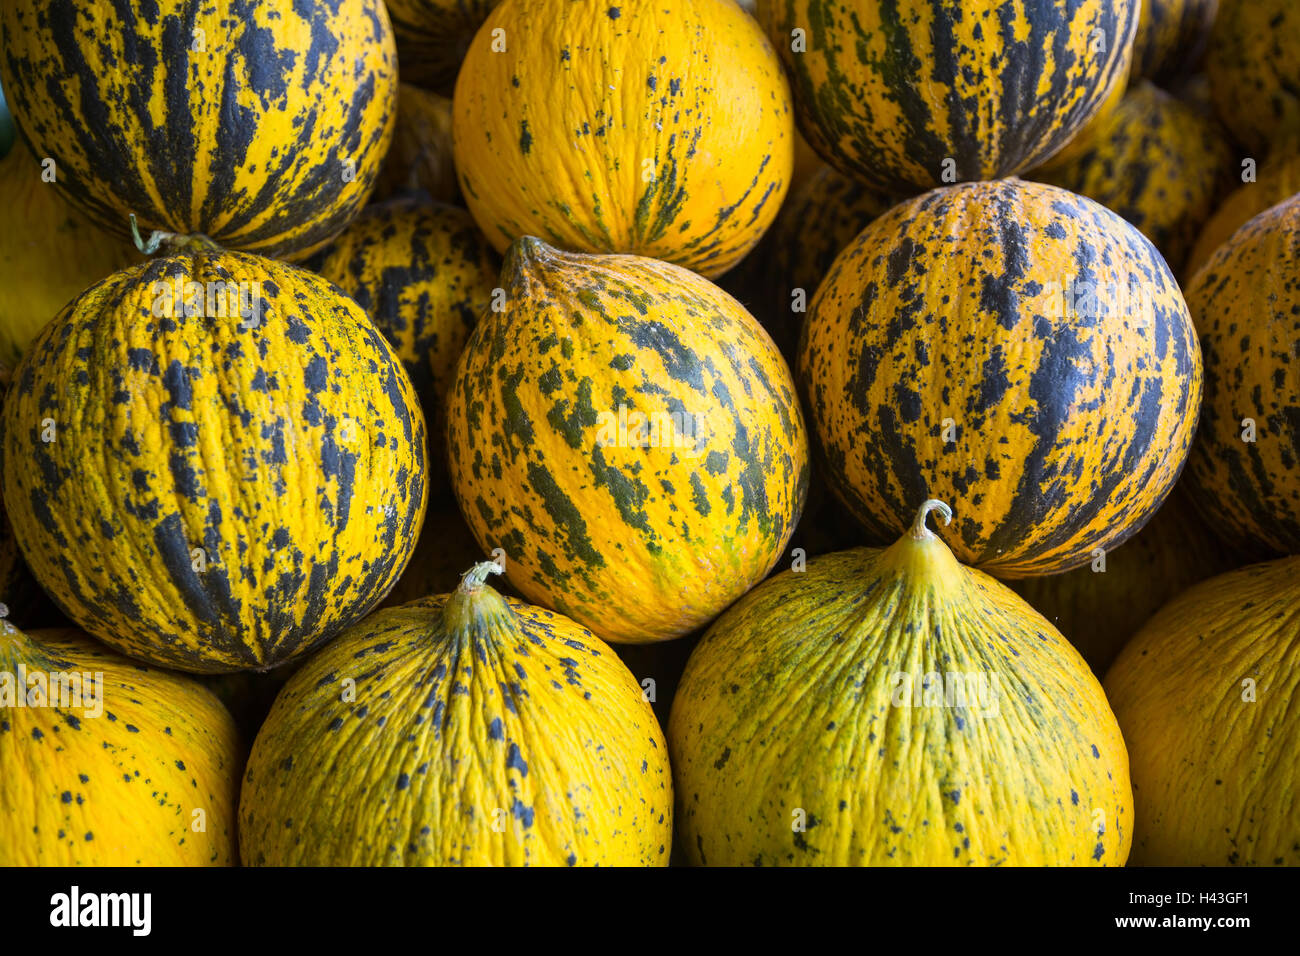 Ripe yellow melons in the store. Stock Photo